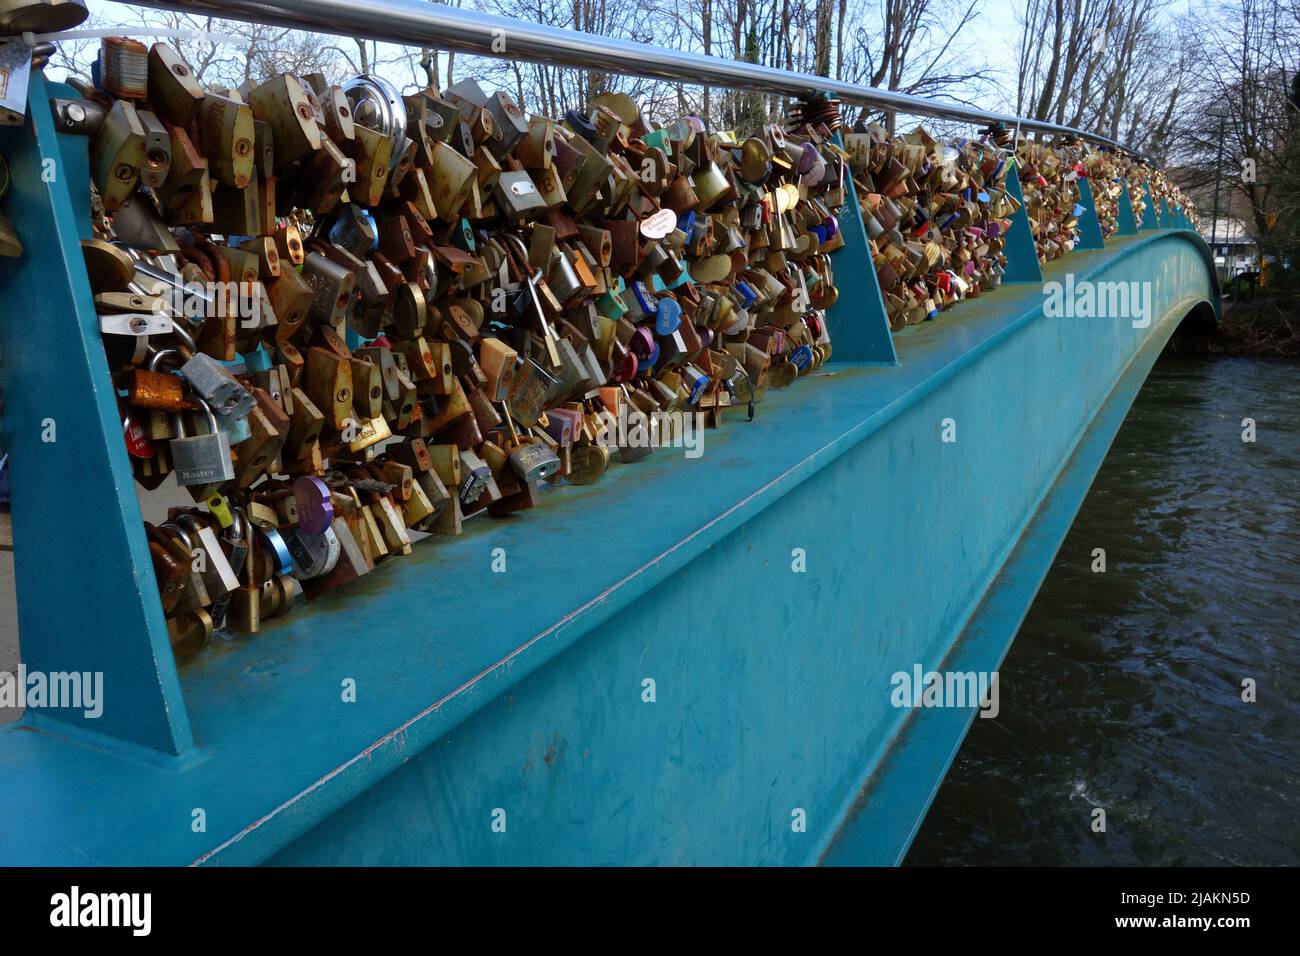 Love locks on the Weir bridge over the River Wye in Bakewell, Derbyshire. Stock Photo